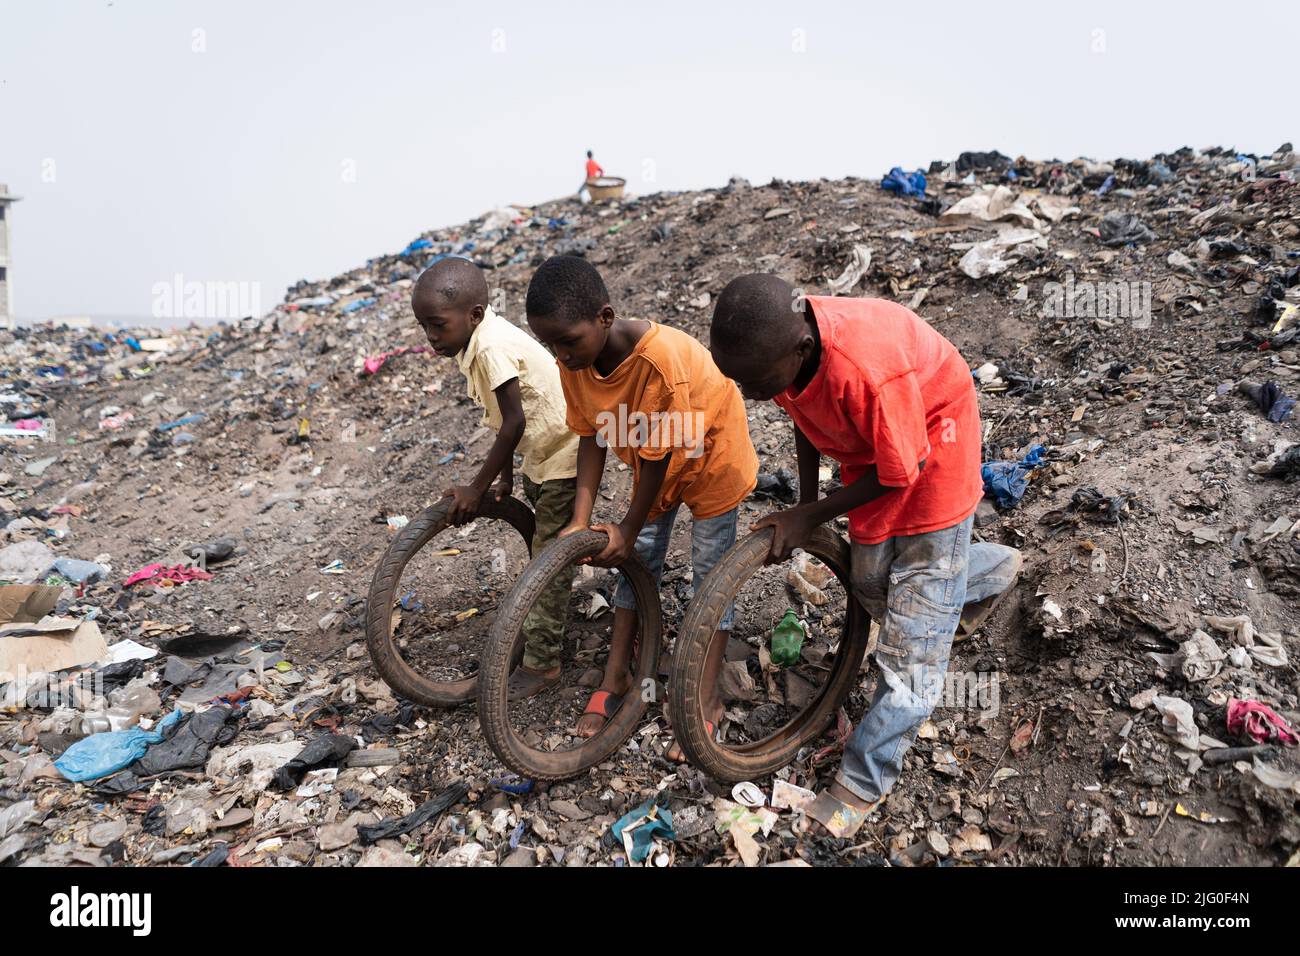 Landfill in West Africa as playground for three little slum boys competing with recycled bicycle tires: poverty concept in developing countries Stock Photo